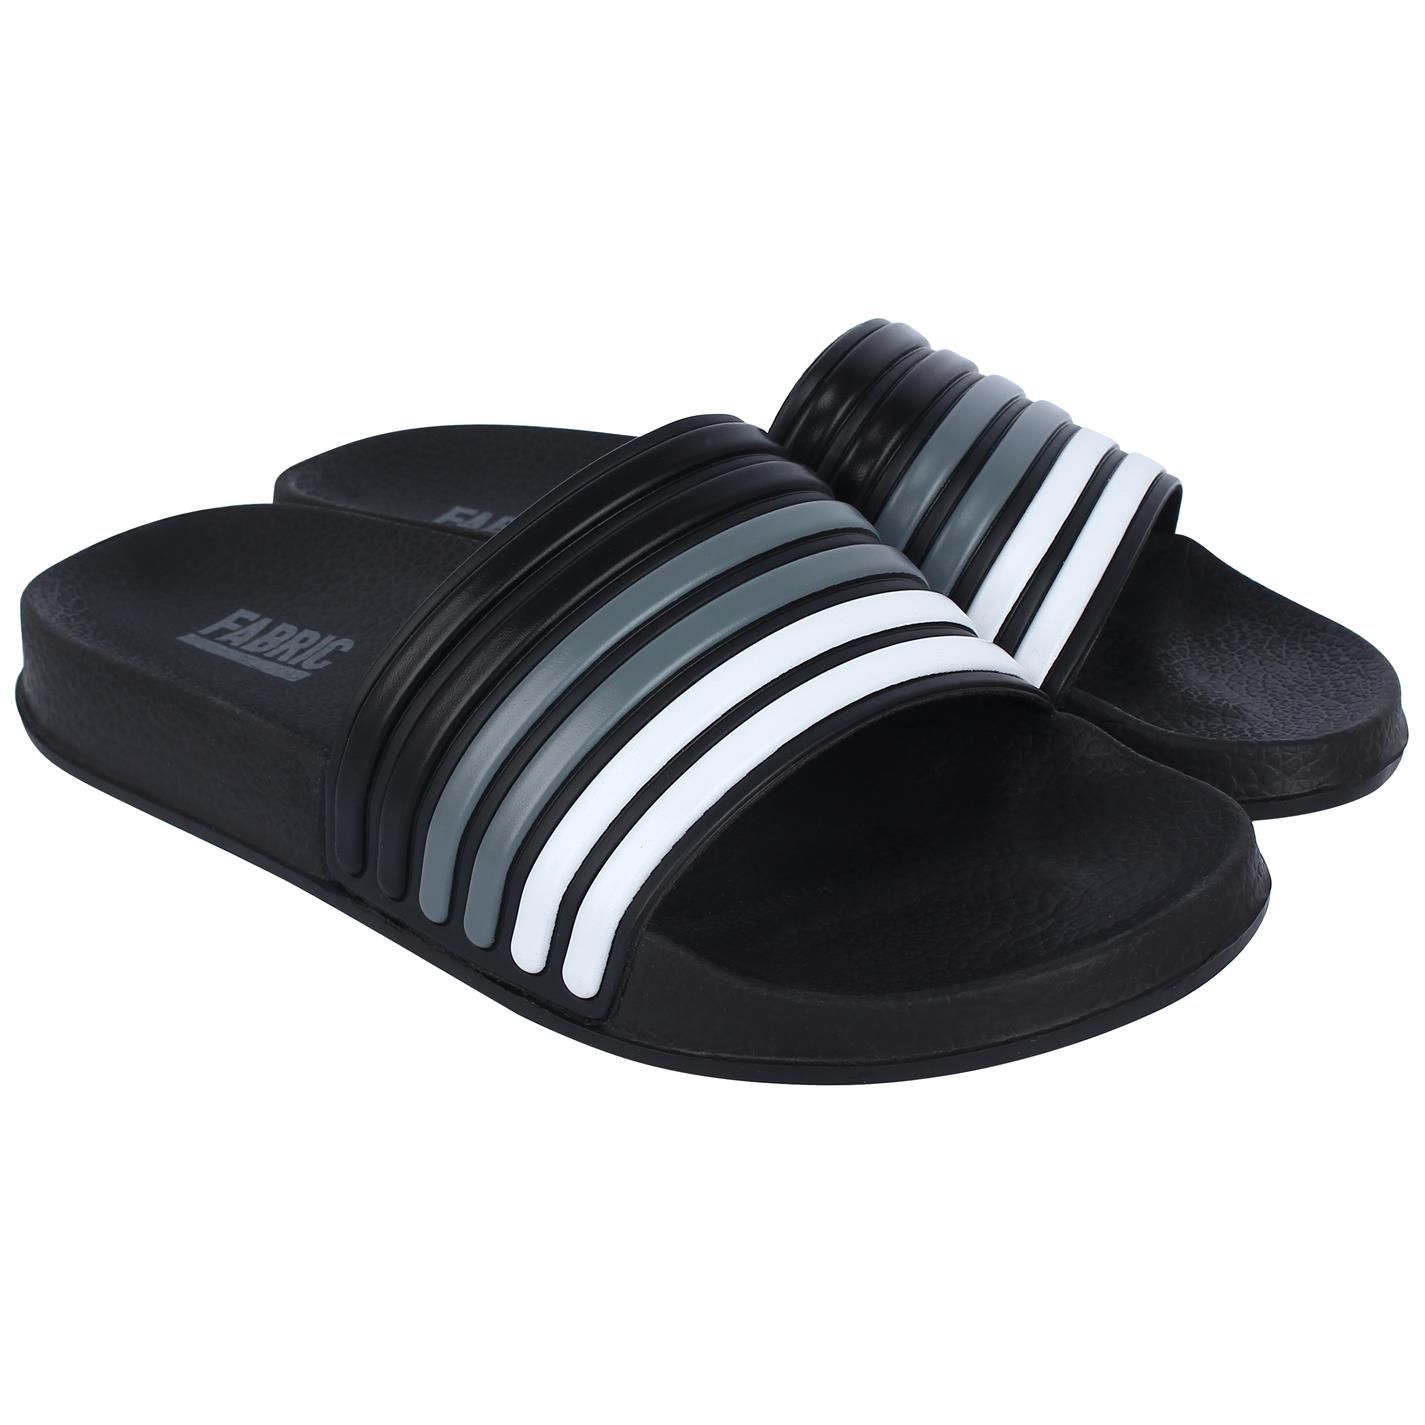 Fabric Childrens Sliders - Refresh your little one's summer footwear collection with the Fabric Childrens Sliders, crafted with a wide strap across the forefoot, teamed with a contoured footbed that ensures all day comfort. A gradient stripe design to the strap along with the classic Fabric branding completes the look.